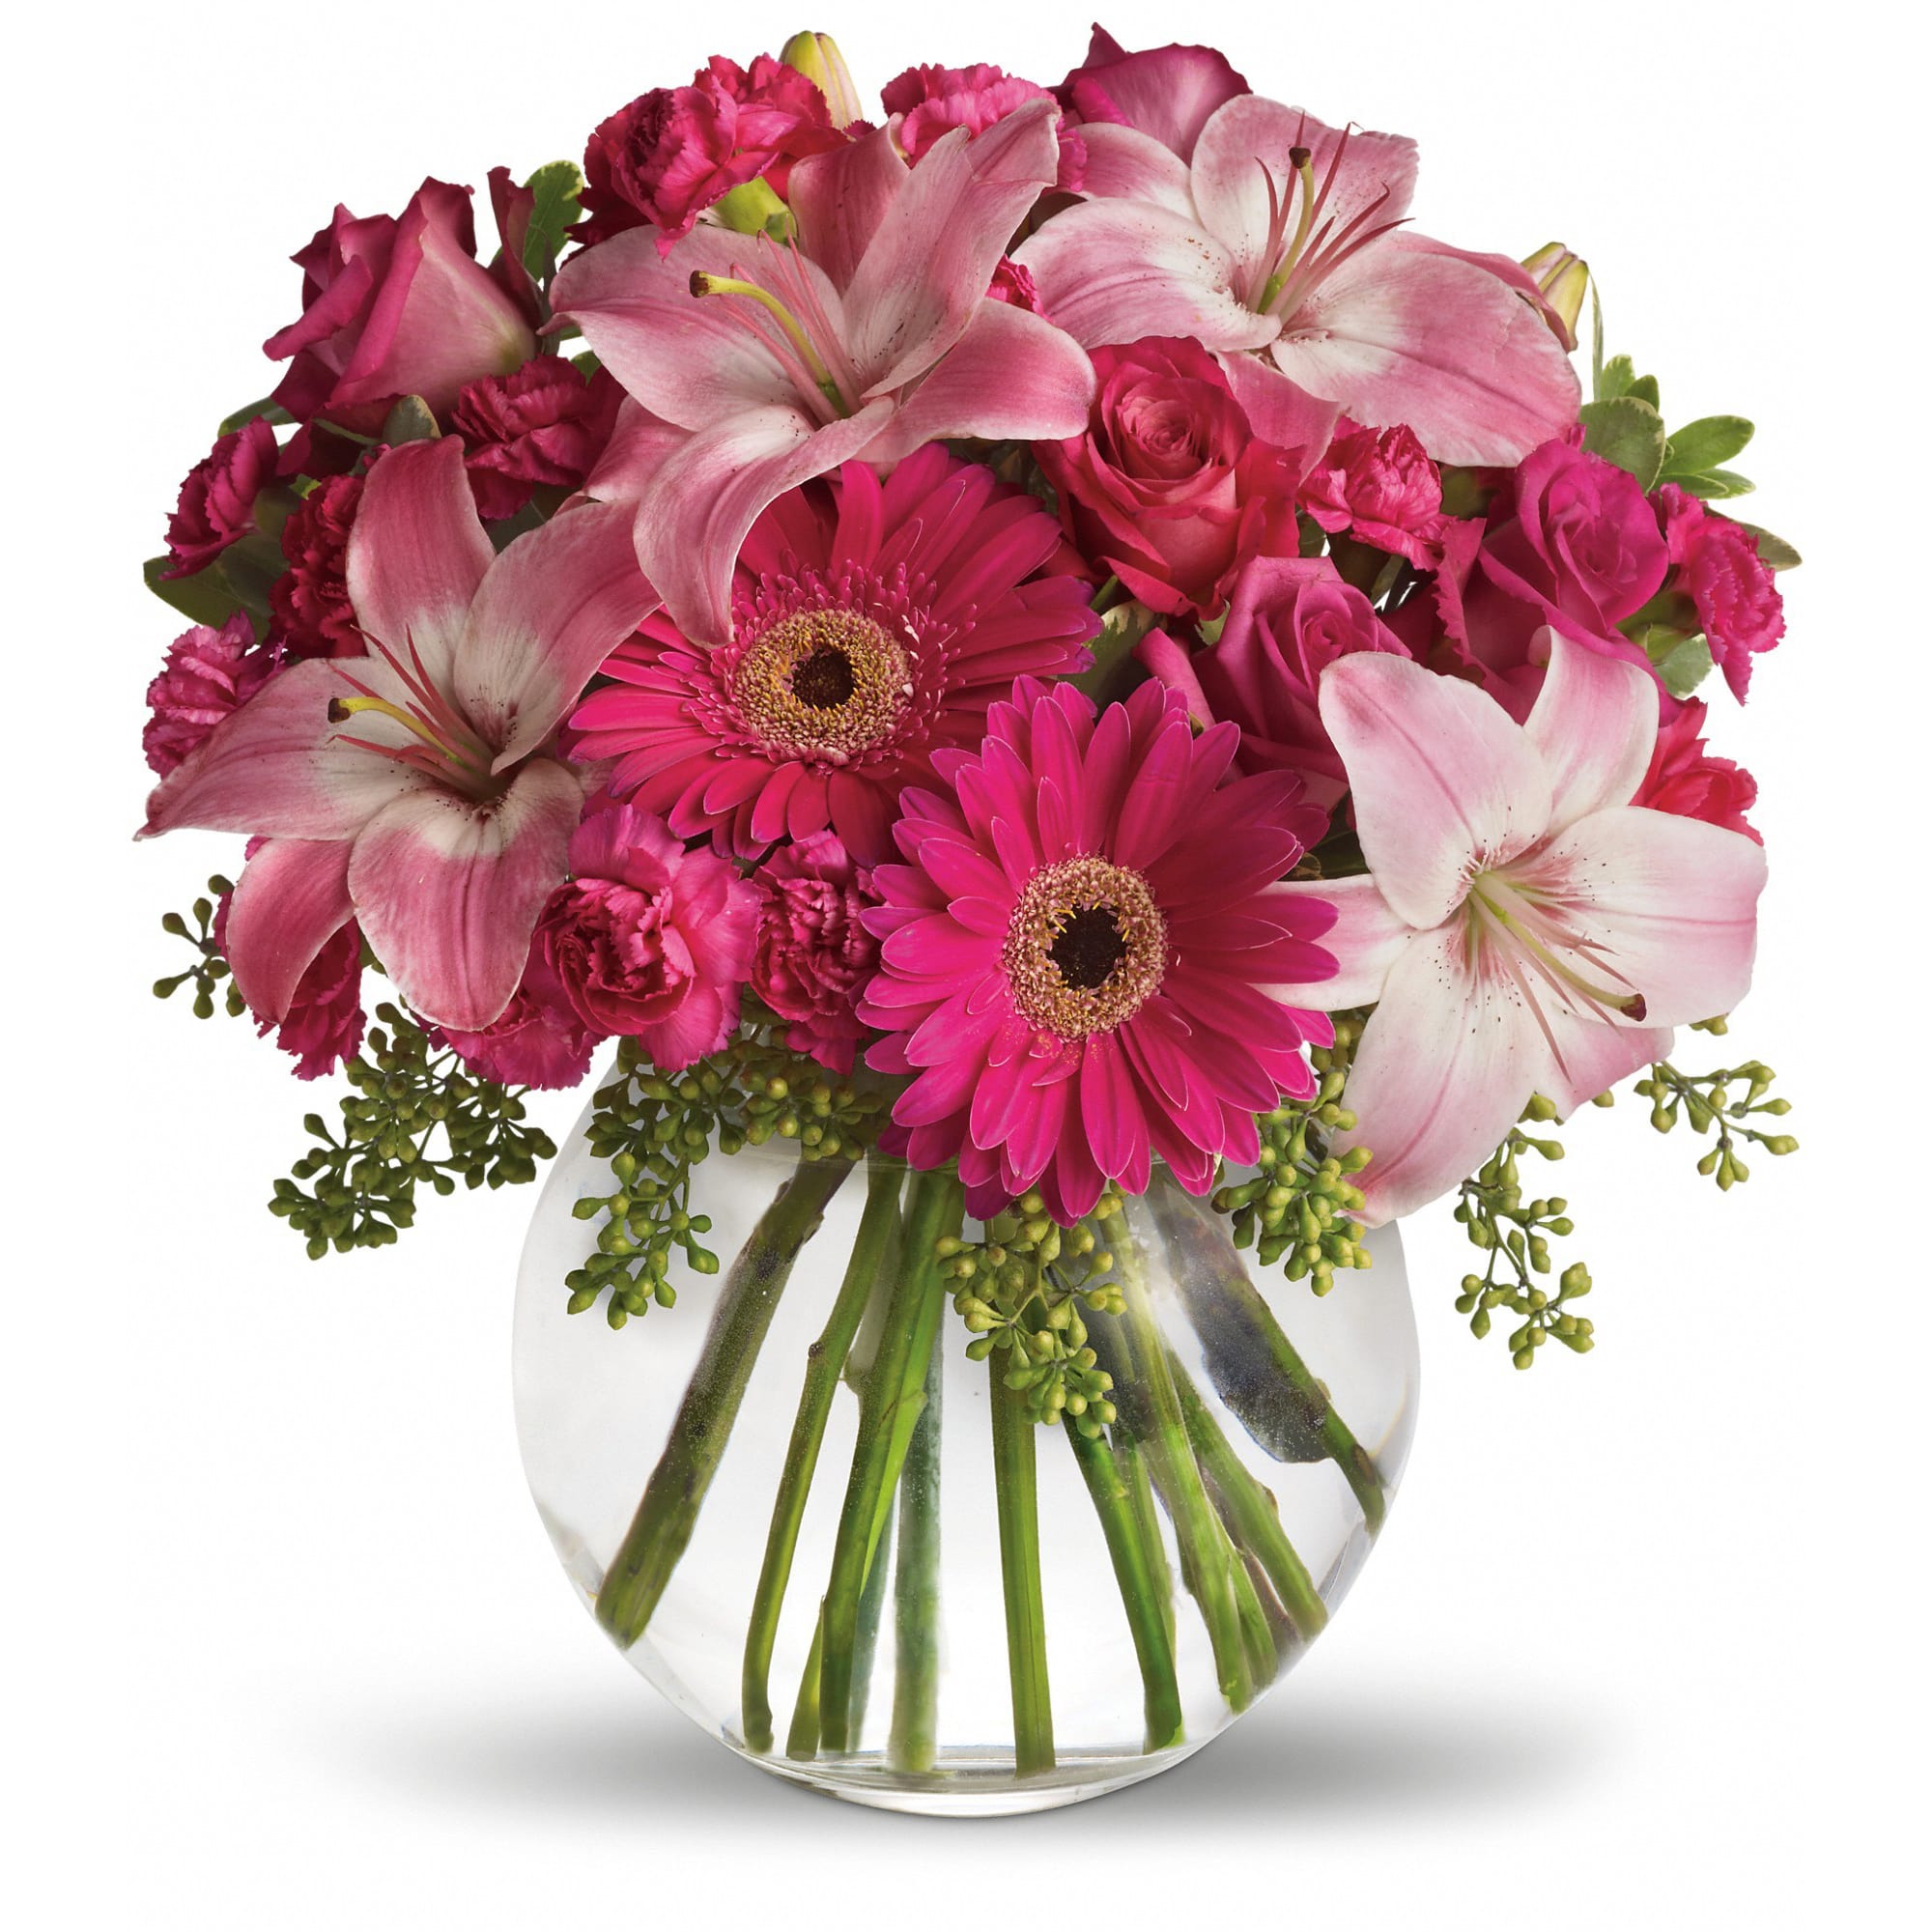 A Little Pink Me Up - Youthful. Graceful. Beautiful. These are just a few qualities that come to mind when gazing at a gorgeous bouquet of pink flowers. Whether you want this arrangement to say &quot;Happy Anniversary&quot; or &quot;Happy Any Day,&quot; you can be sure the day it arrives will be brighter for anyone lucky enough to receive it.  Lovely pink roses and asiatic lilies are joined by hot pink gerberas and miniature carnations, pink full-sized carnations and more in a clear glass ball. Send this one and life will be a bowl of cheer!  Approximately 13 1/4&quot; W x 14 1/2&quot; H  Orientation: All-Around  As Shown : T10-3A Deluxe : T10-3B Premium : T10-3C